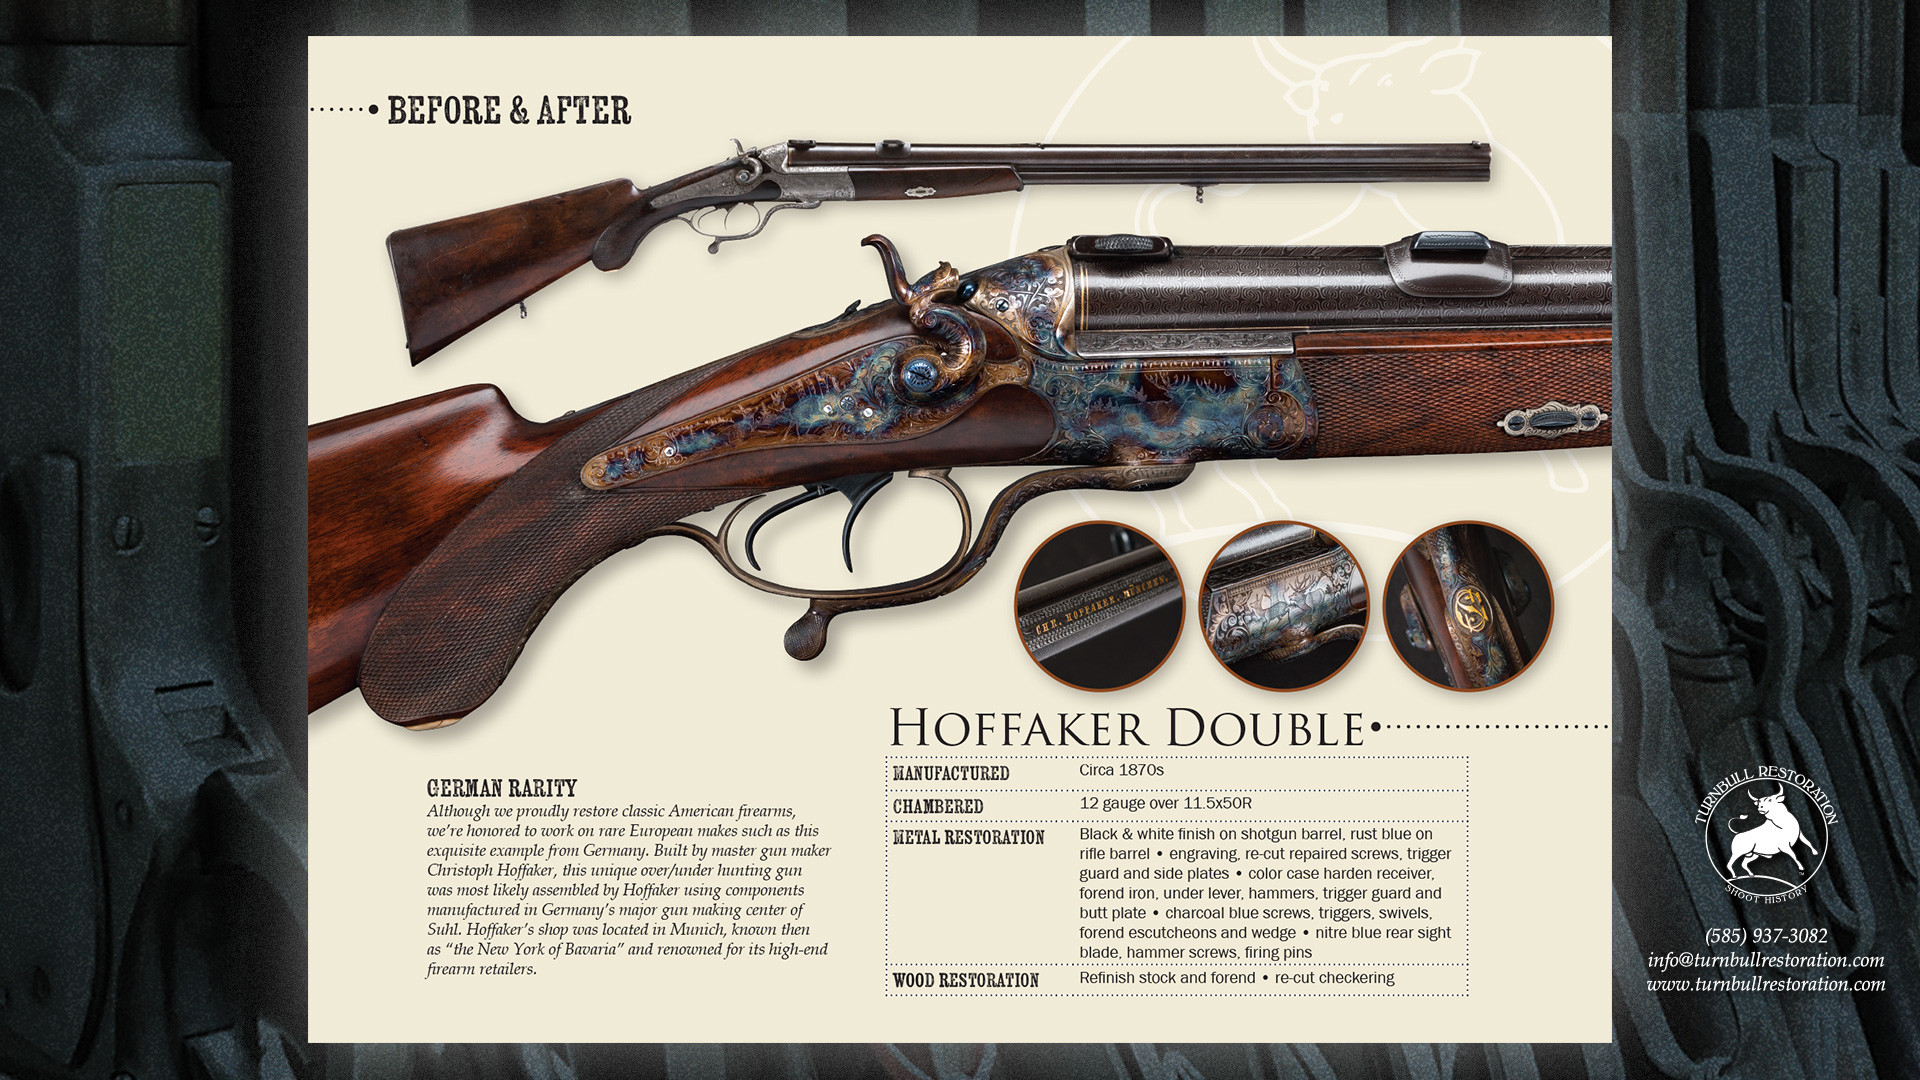 1920x1080 1920 x 1080, Historical background of Hoffaker Double provided by Thomas  Devers, President, German Gun Collectors Association. August, 2018